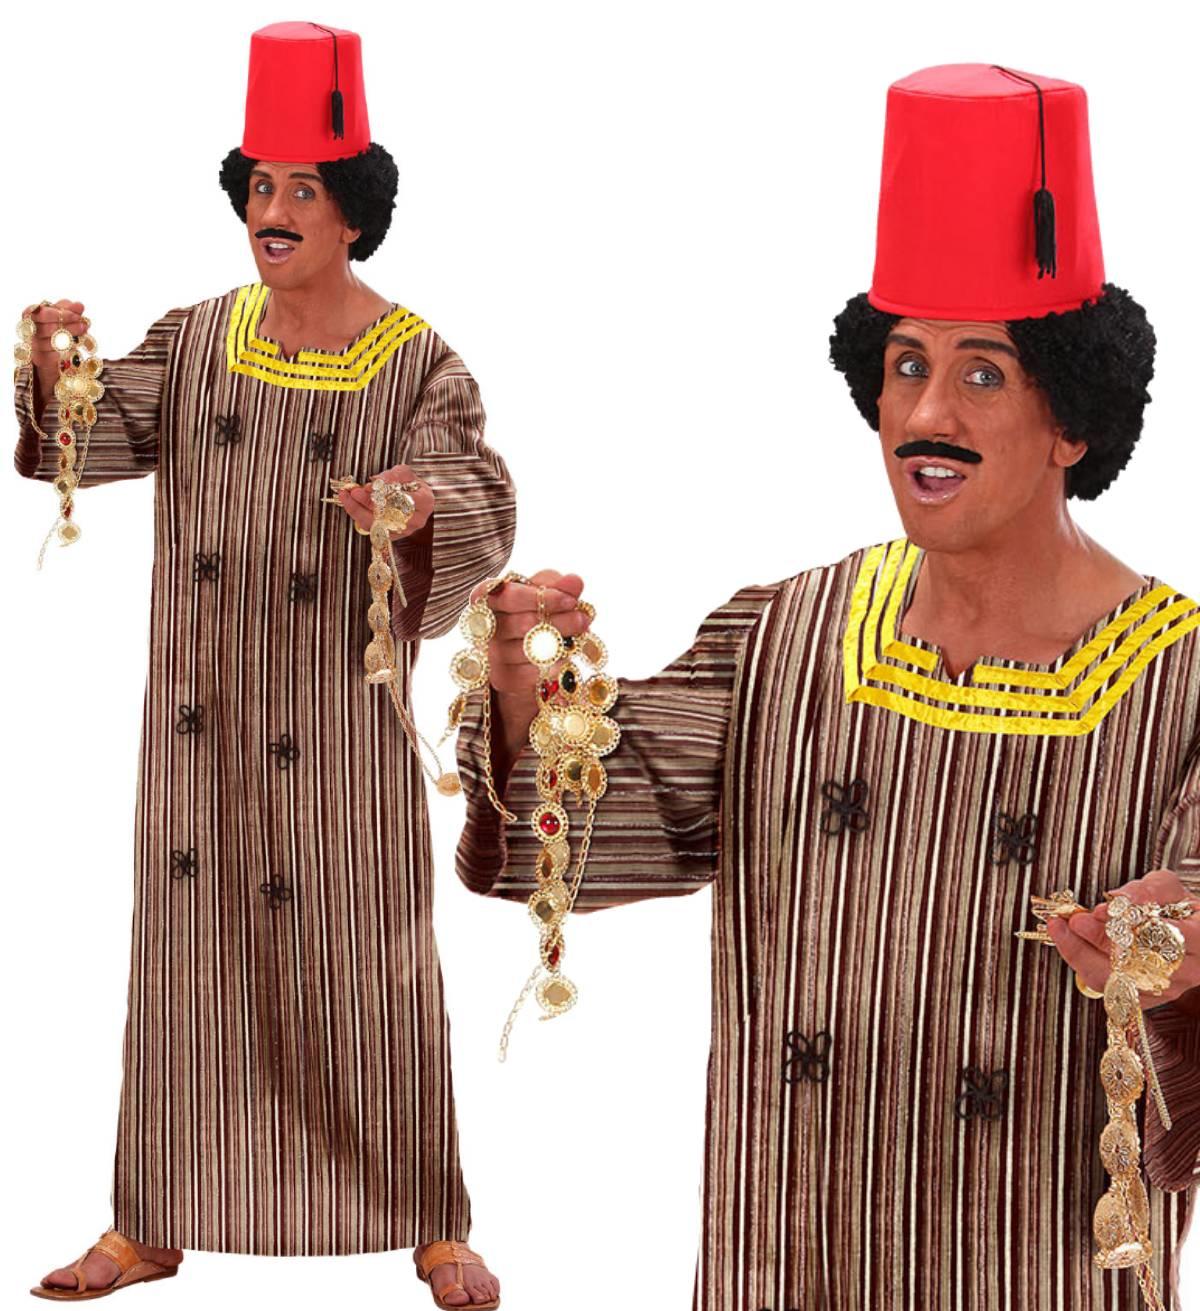 Moroccan Man costume by Widmann 5918 available here at Karnival Costumes online party shop